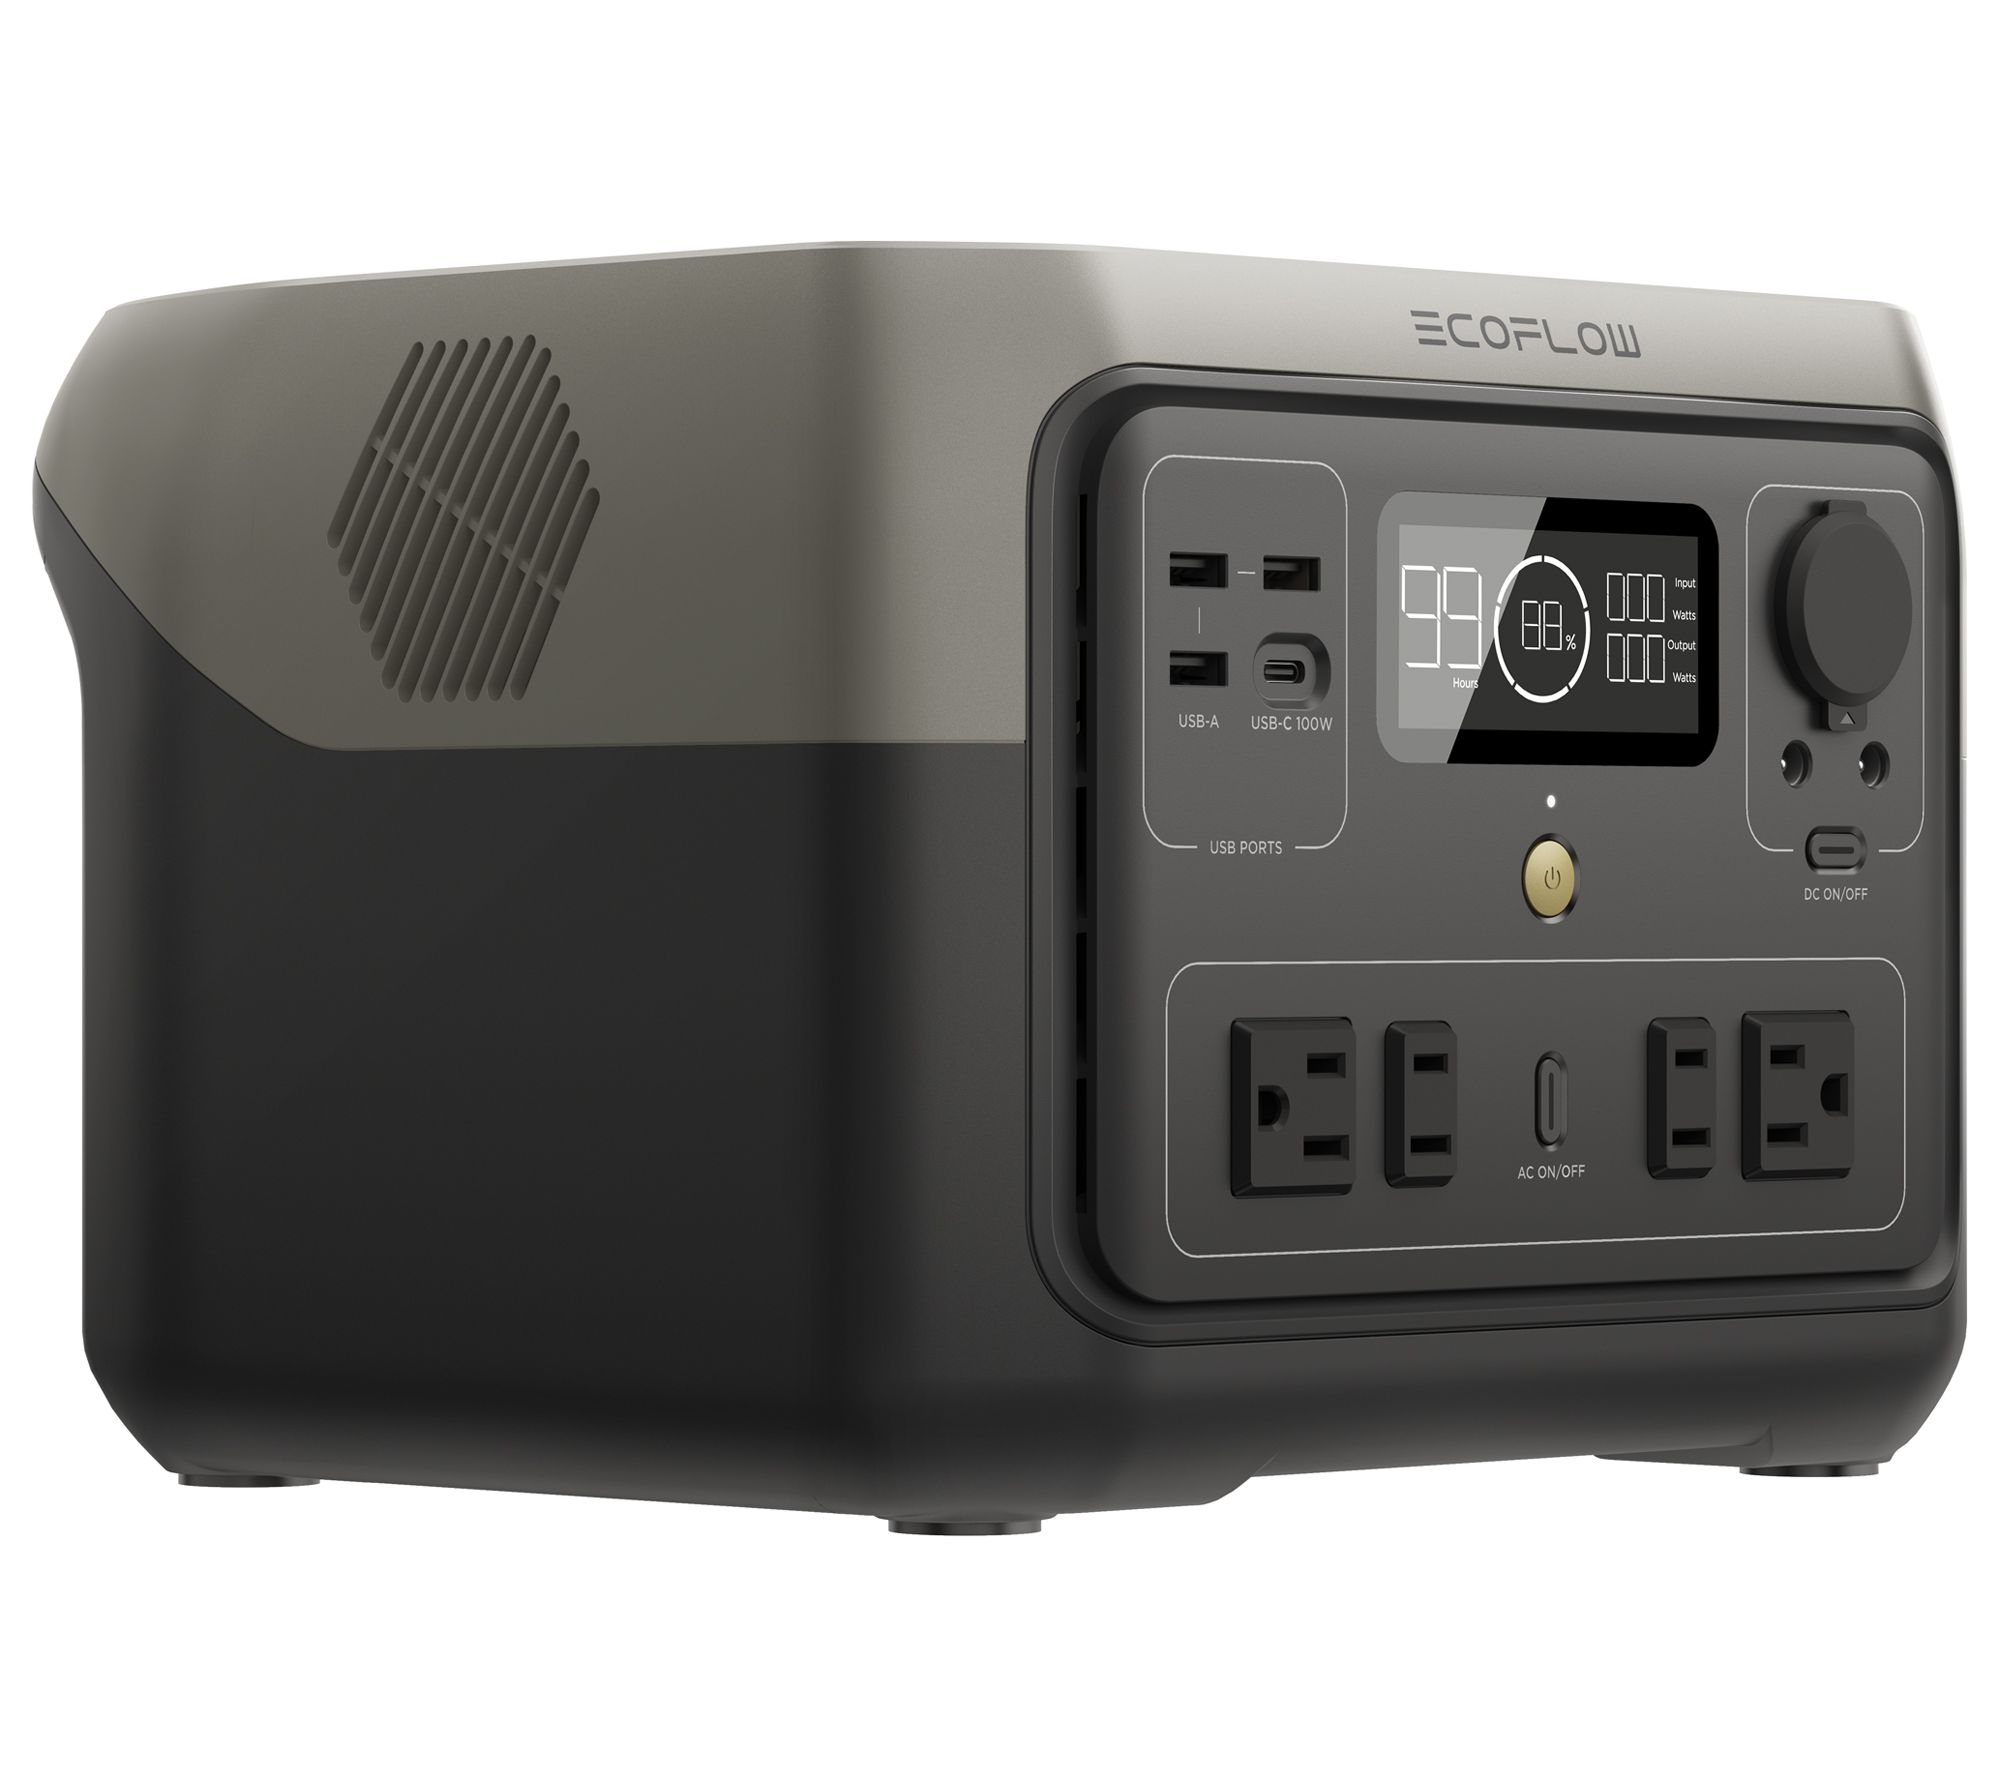 EcoFlow RIVER 2 Max 512Wh Portable Power Station with 11 Outlets - QVC.com $349.98